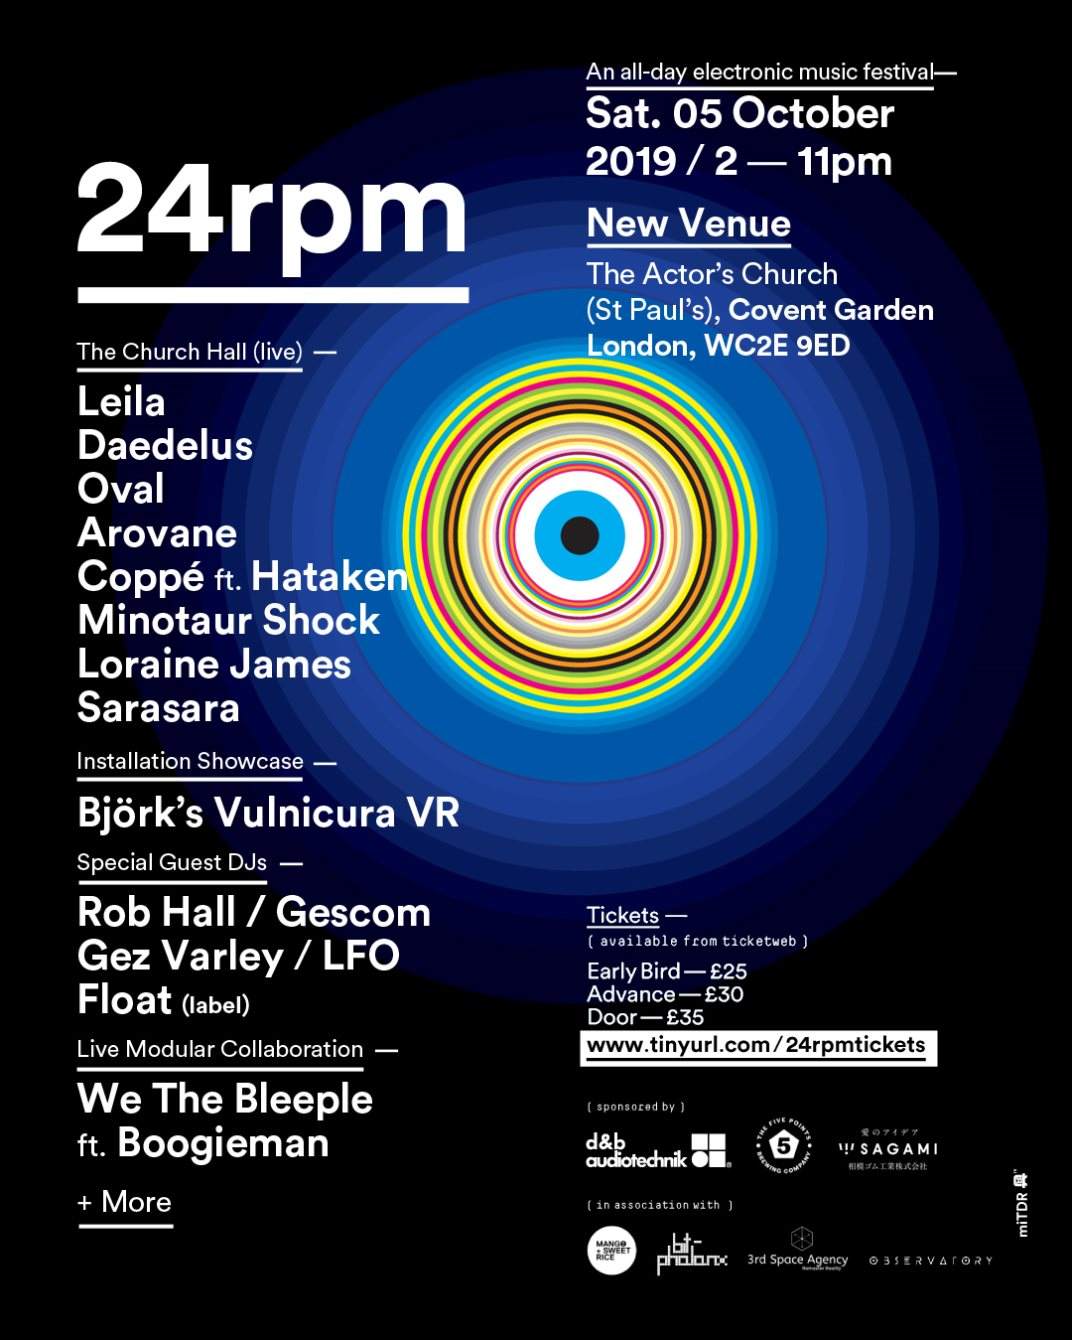 24rpm: An All-Day Electronic Music Festival - フライヤー裏